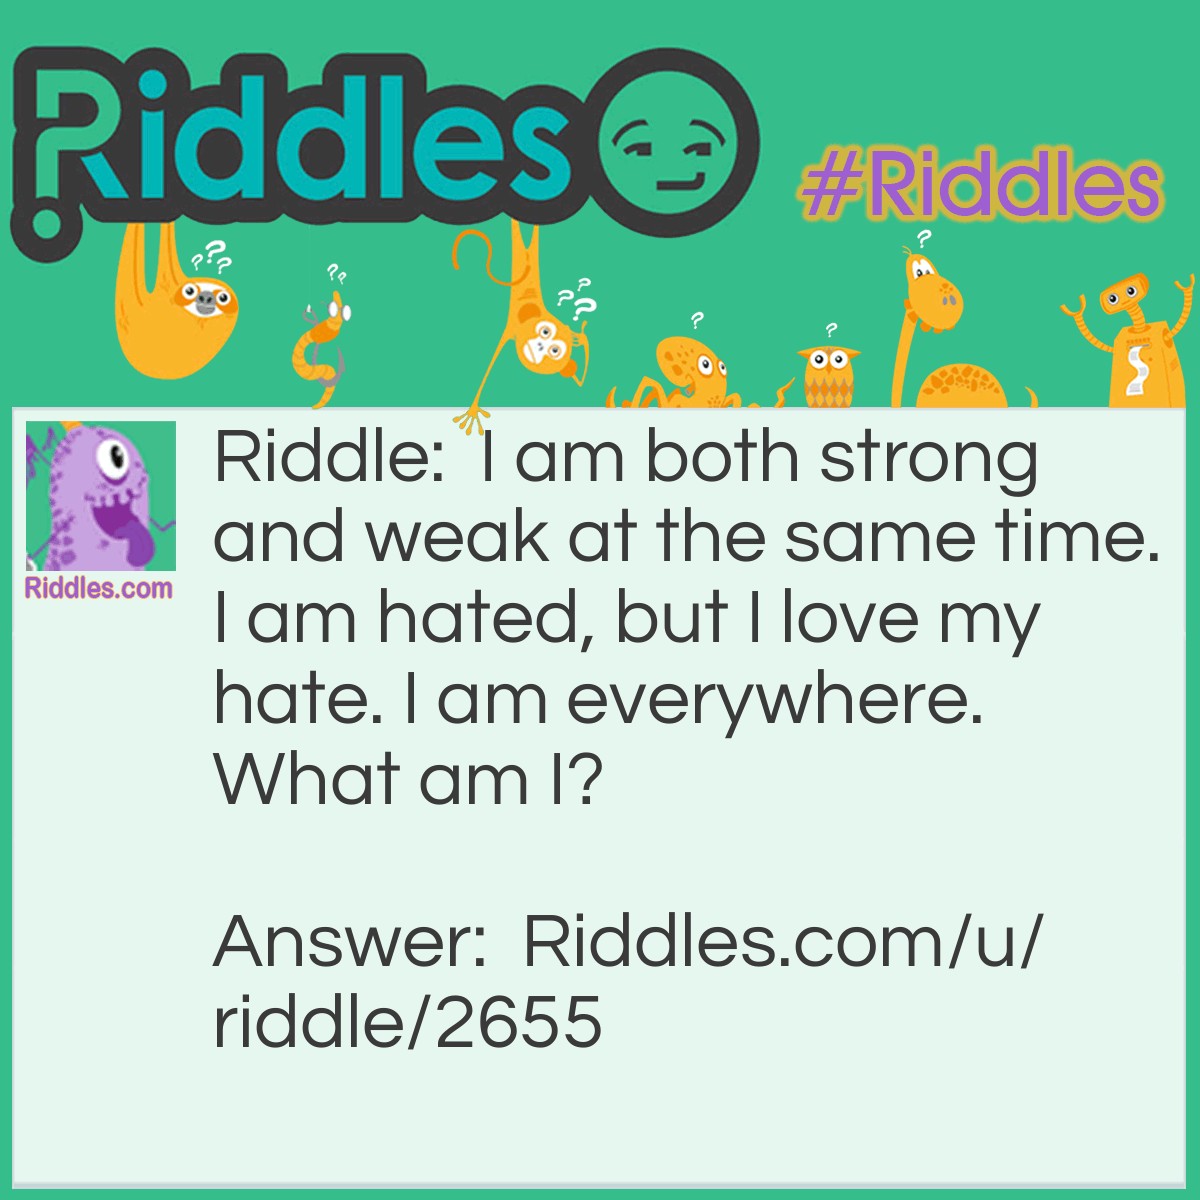 Riddle: I am both strong and weak at the same time. I am hated, but I love my hate. I am everywhere. What am I? Answer: A bully.